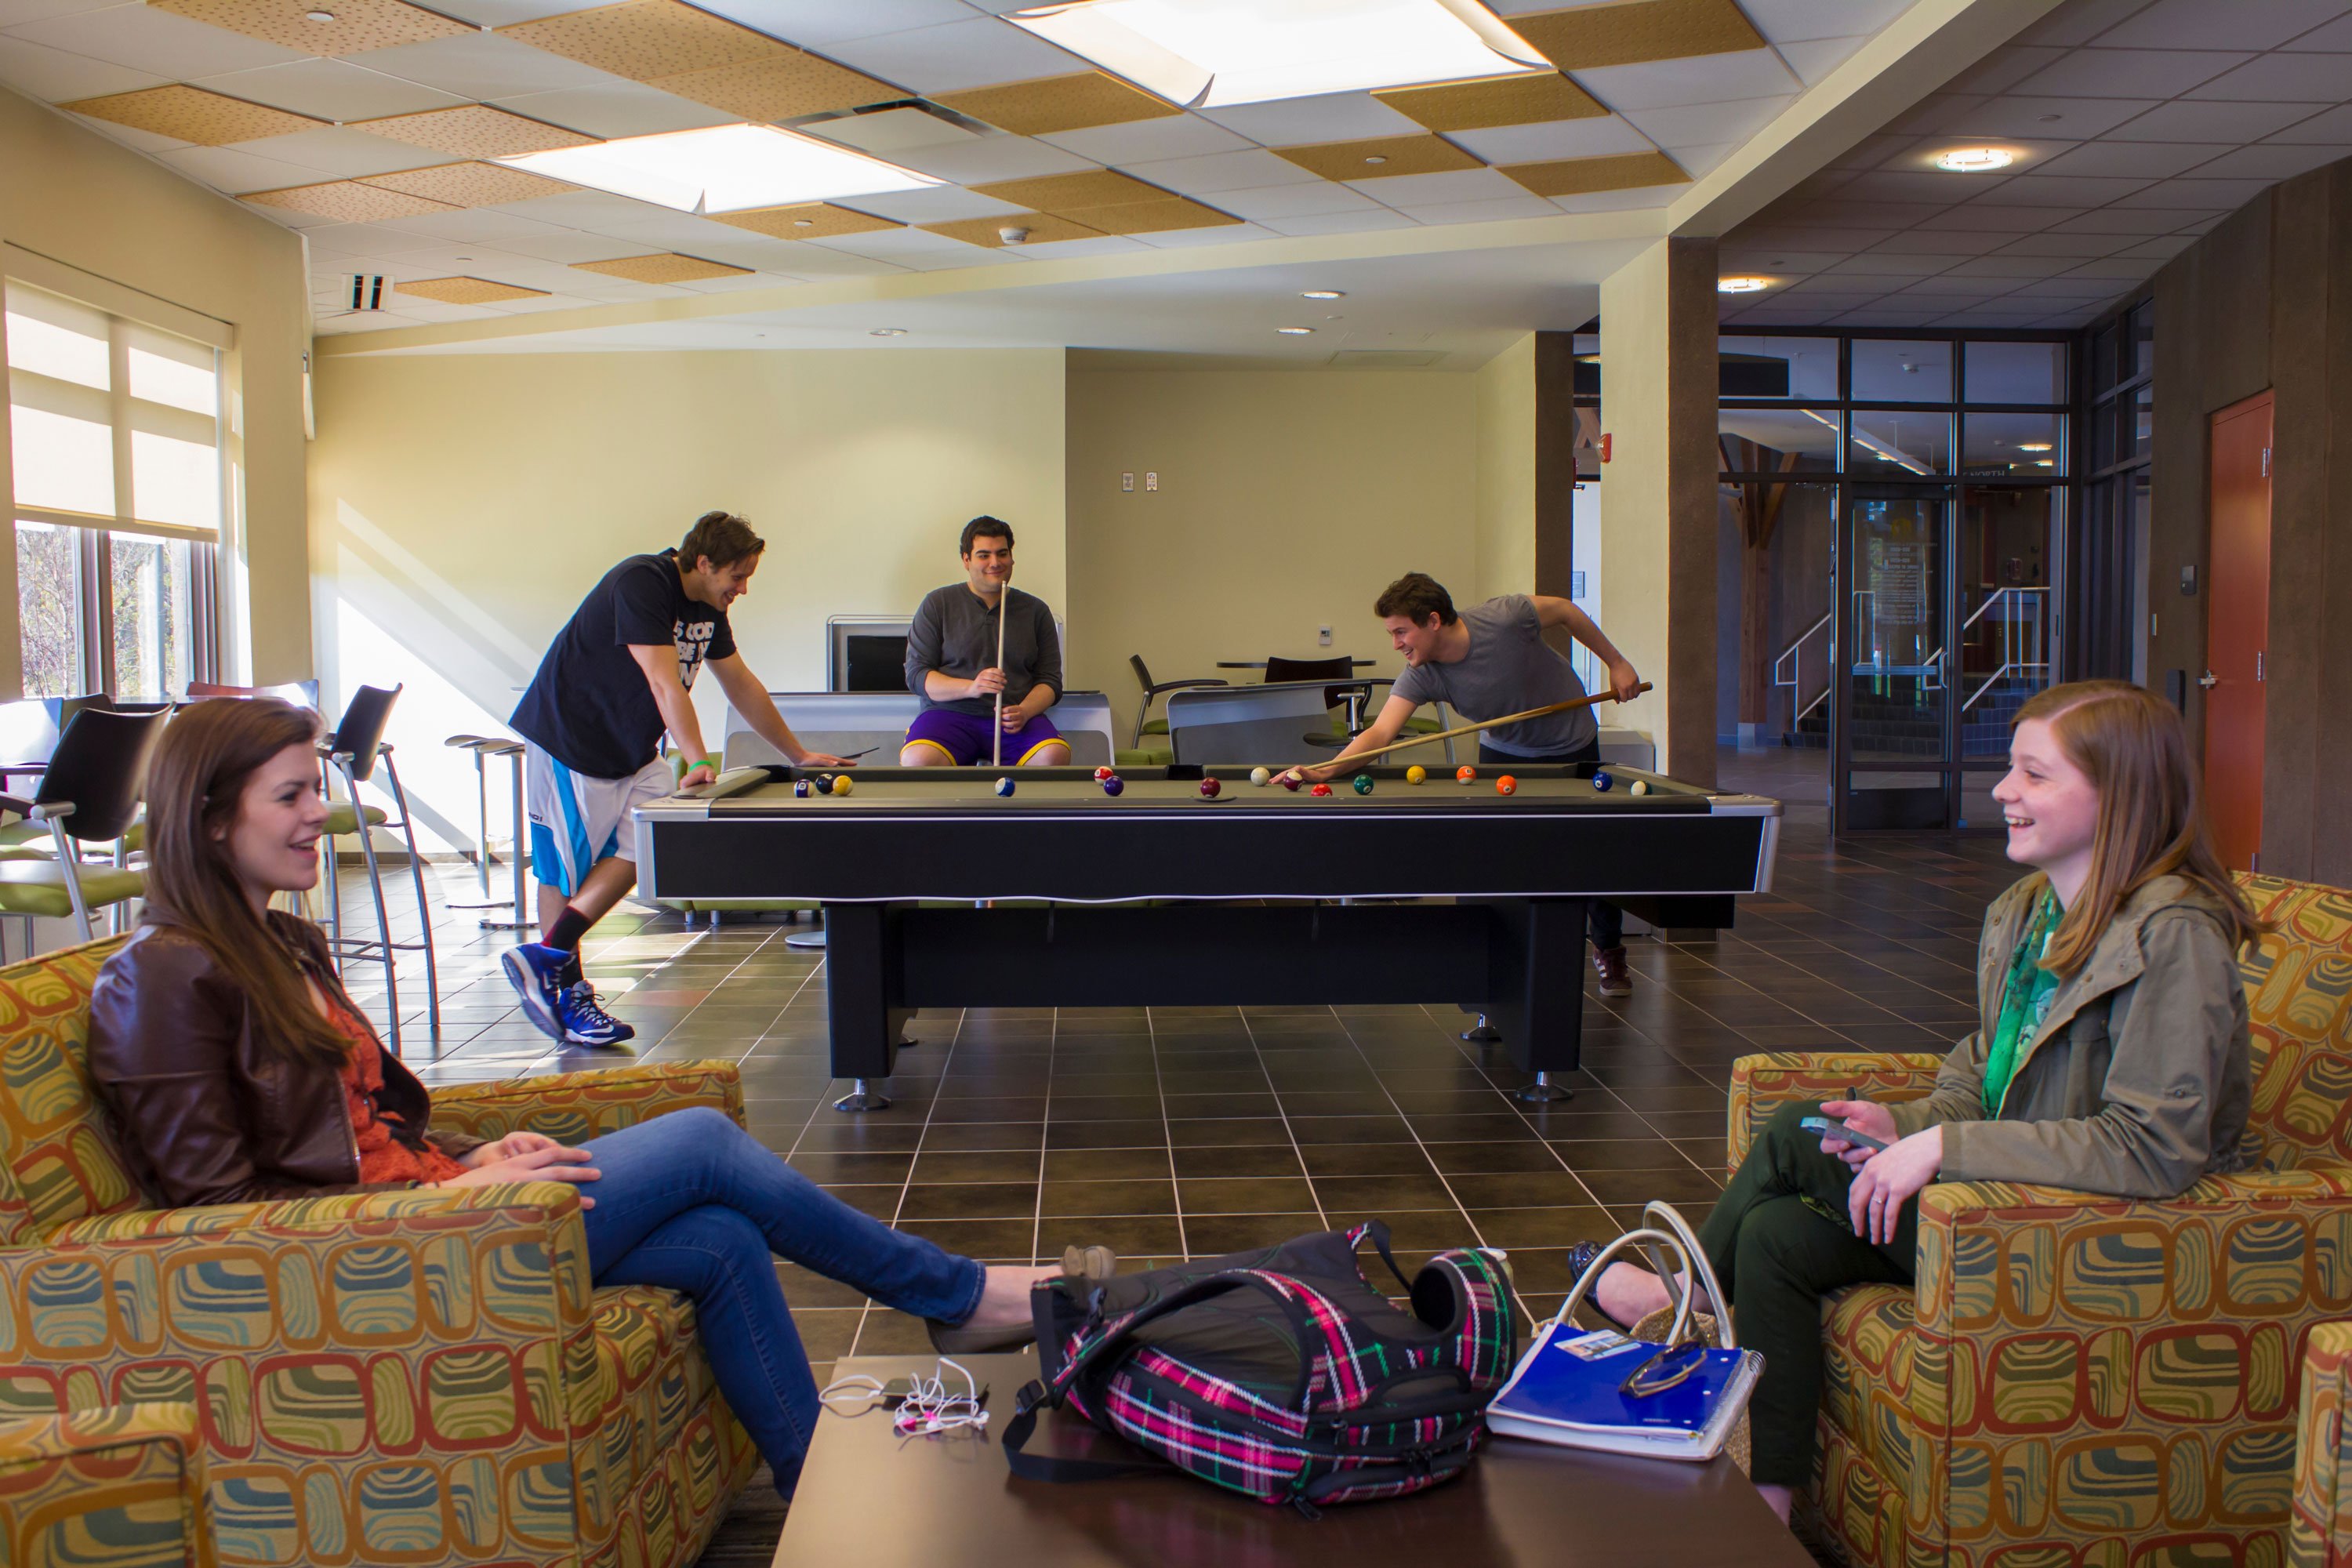 Two students sit and talk, while three others place billiards, inside a Liberty Terrace lounge